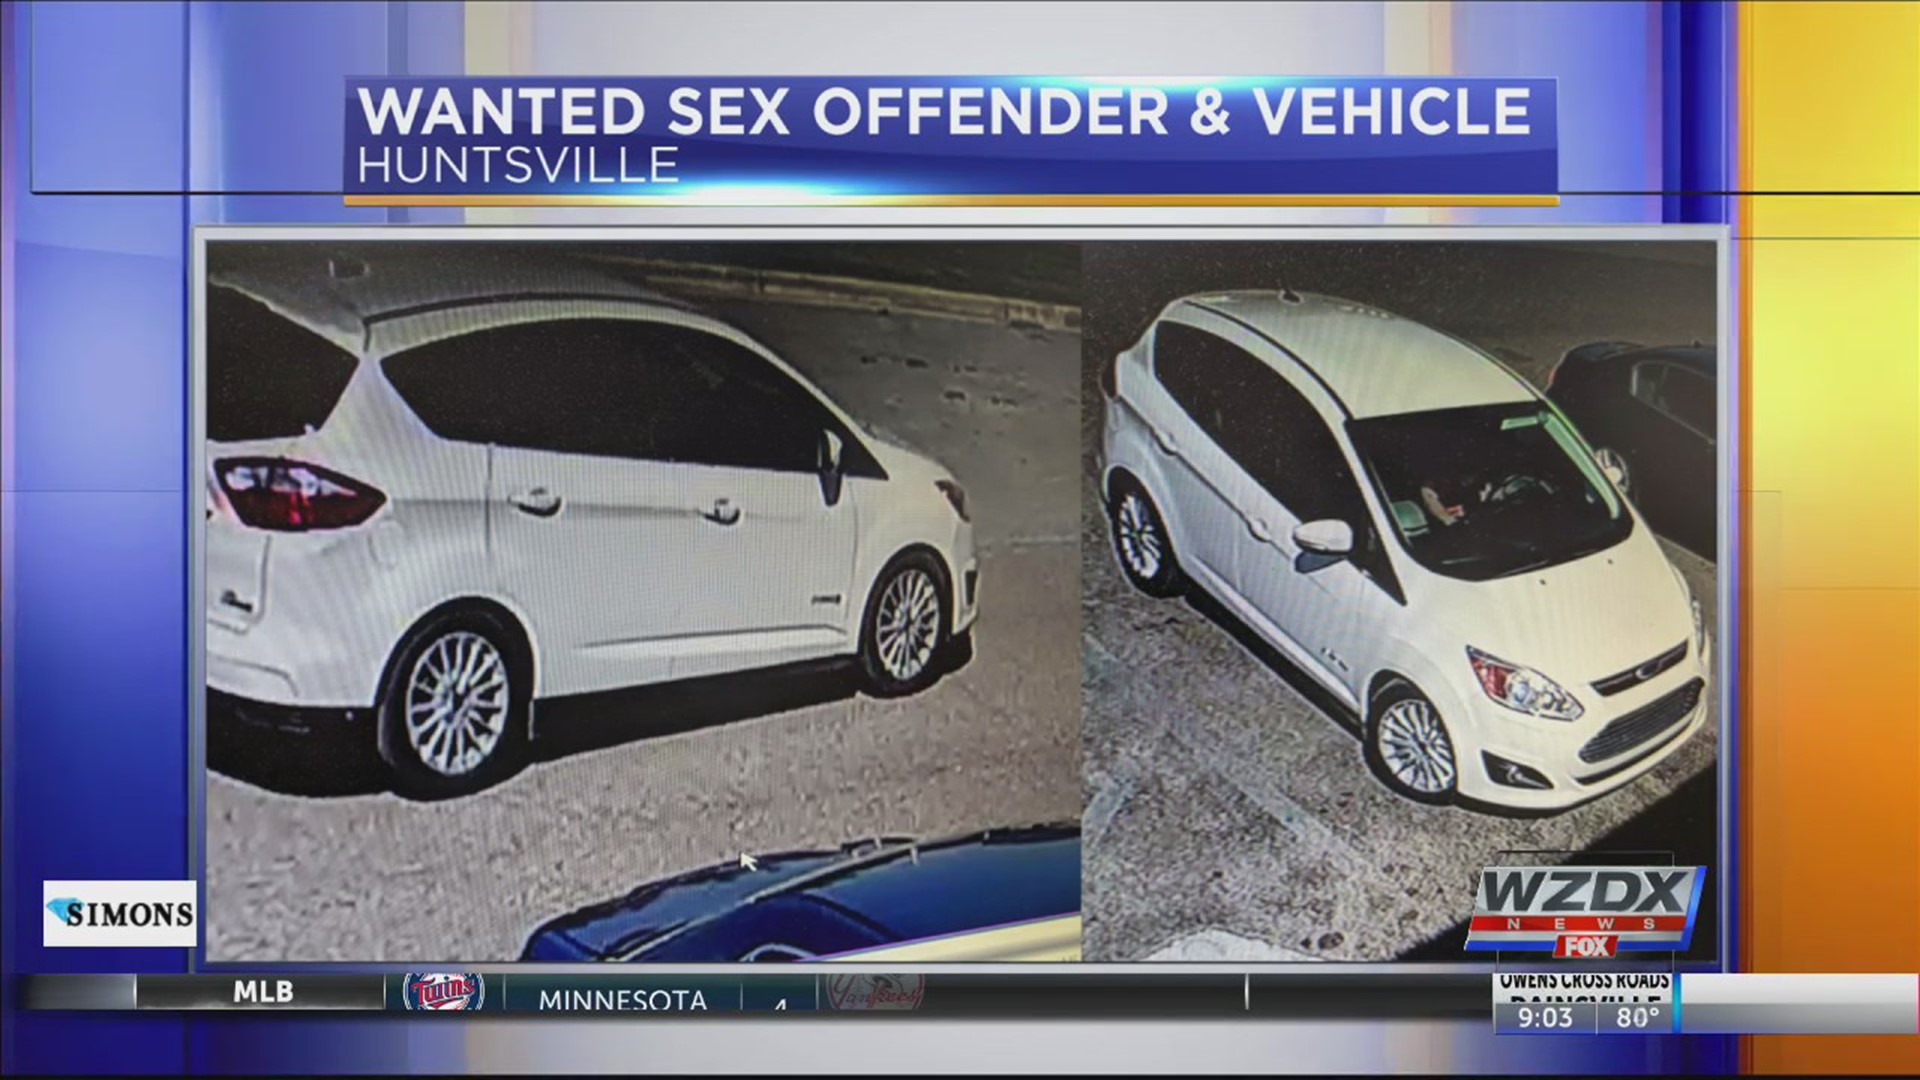 Huntsville Police need your help identifying an offender and vehicle in connection with a sexual abuse case of a juvenile.